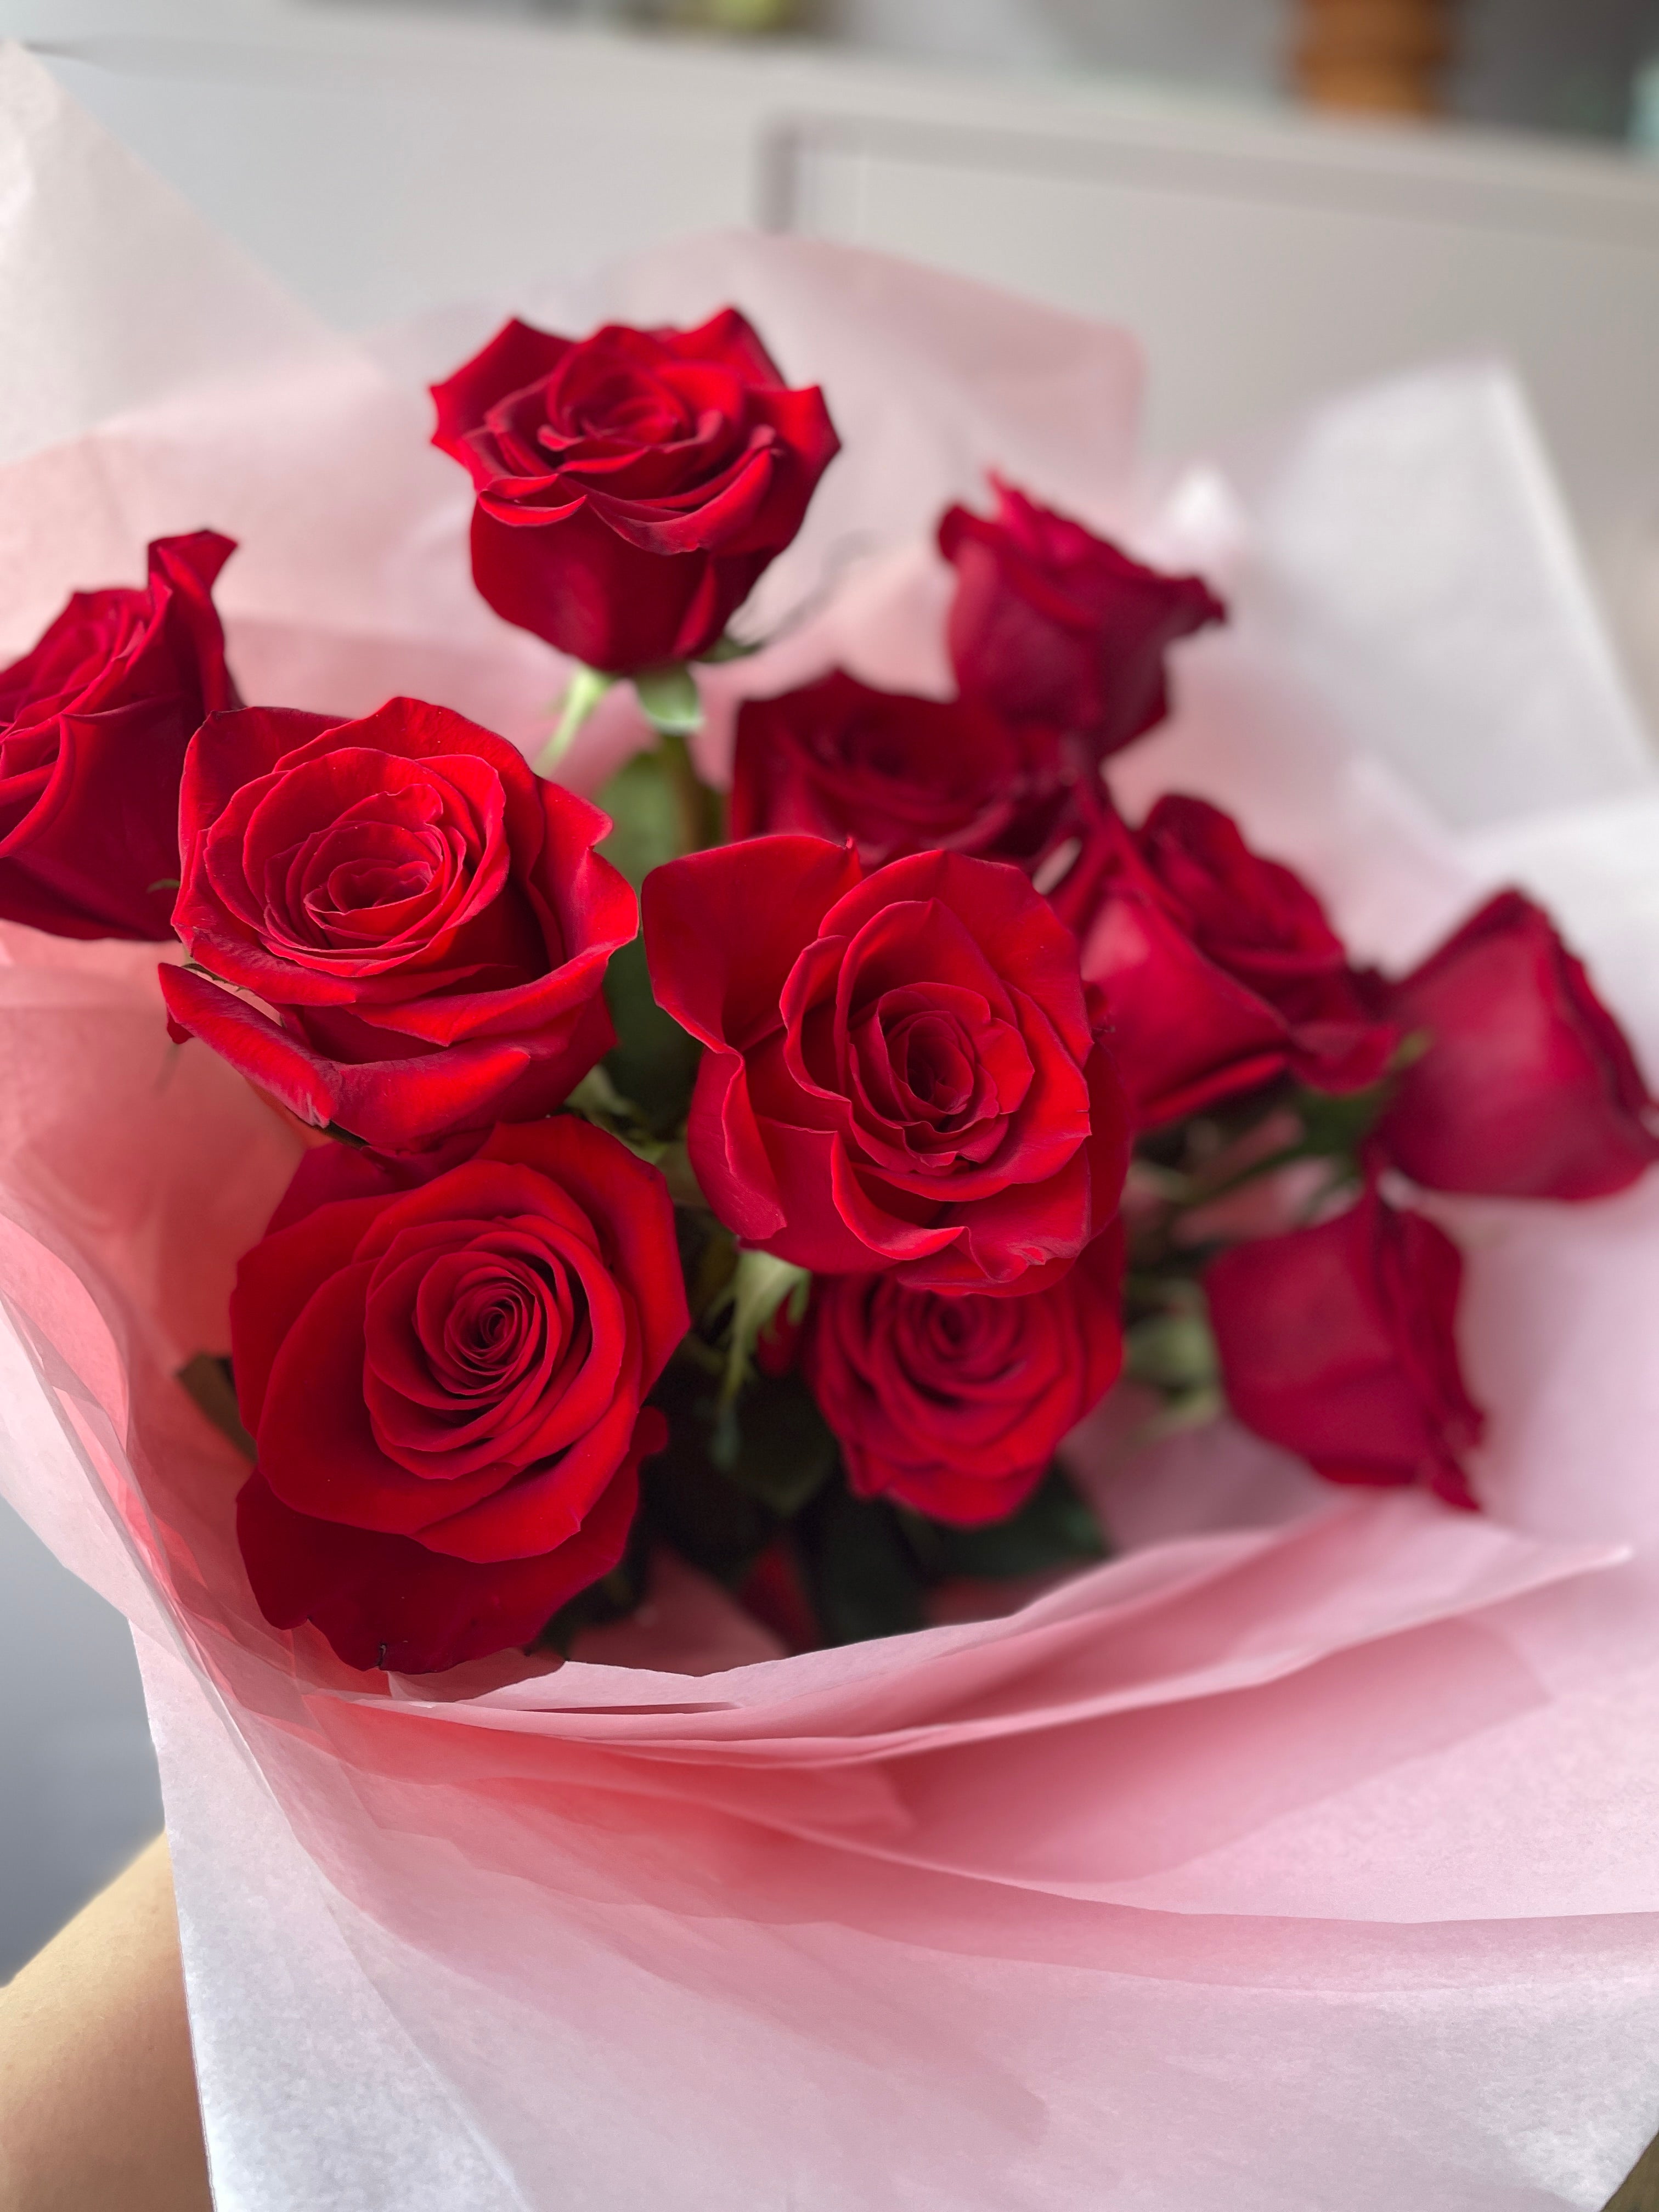 Tissue wrapped Red roses only